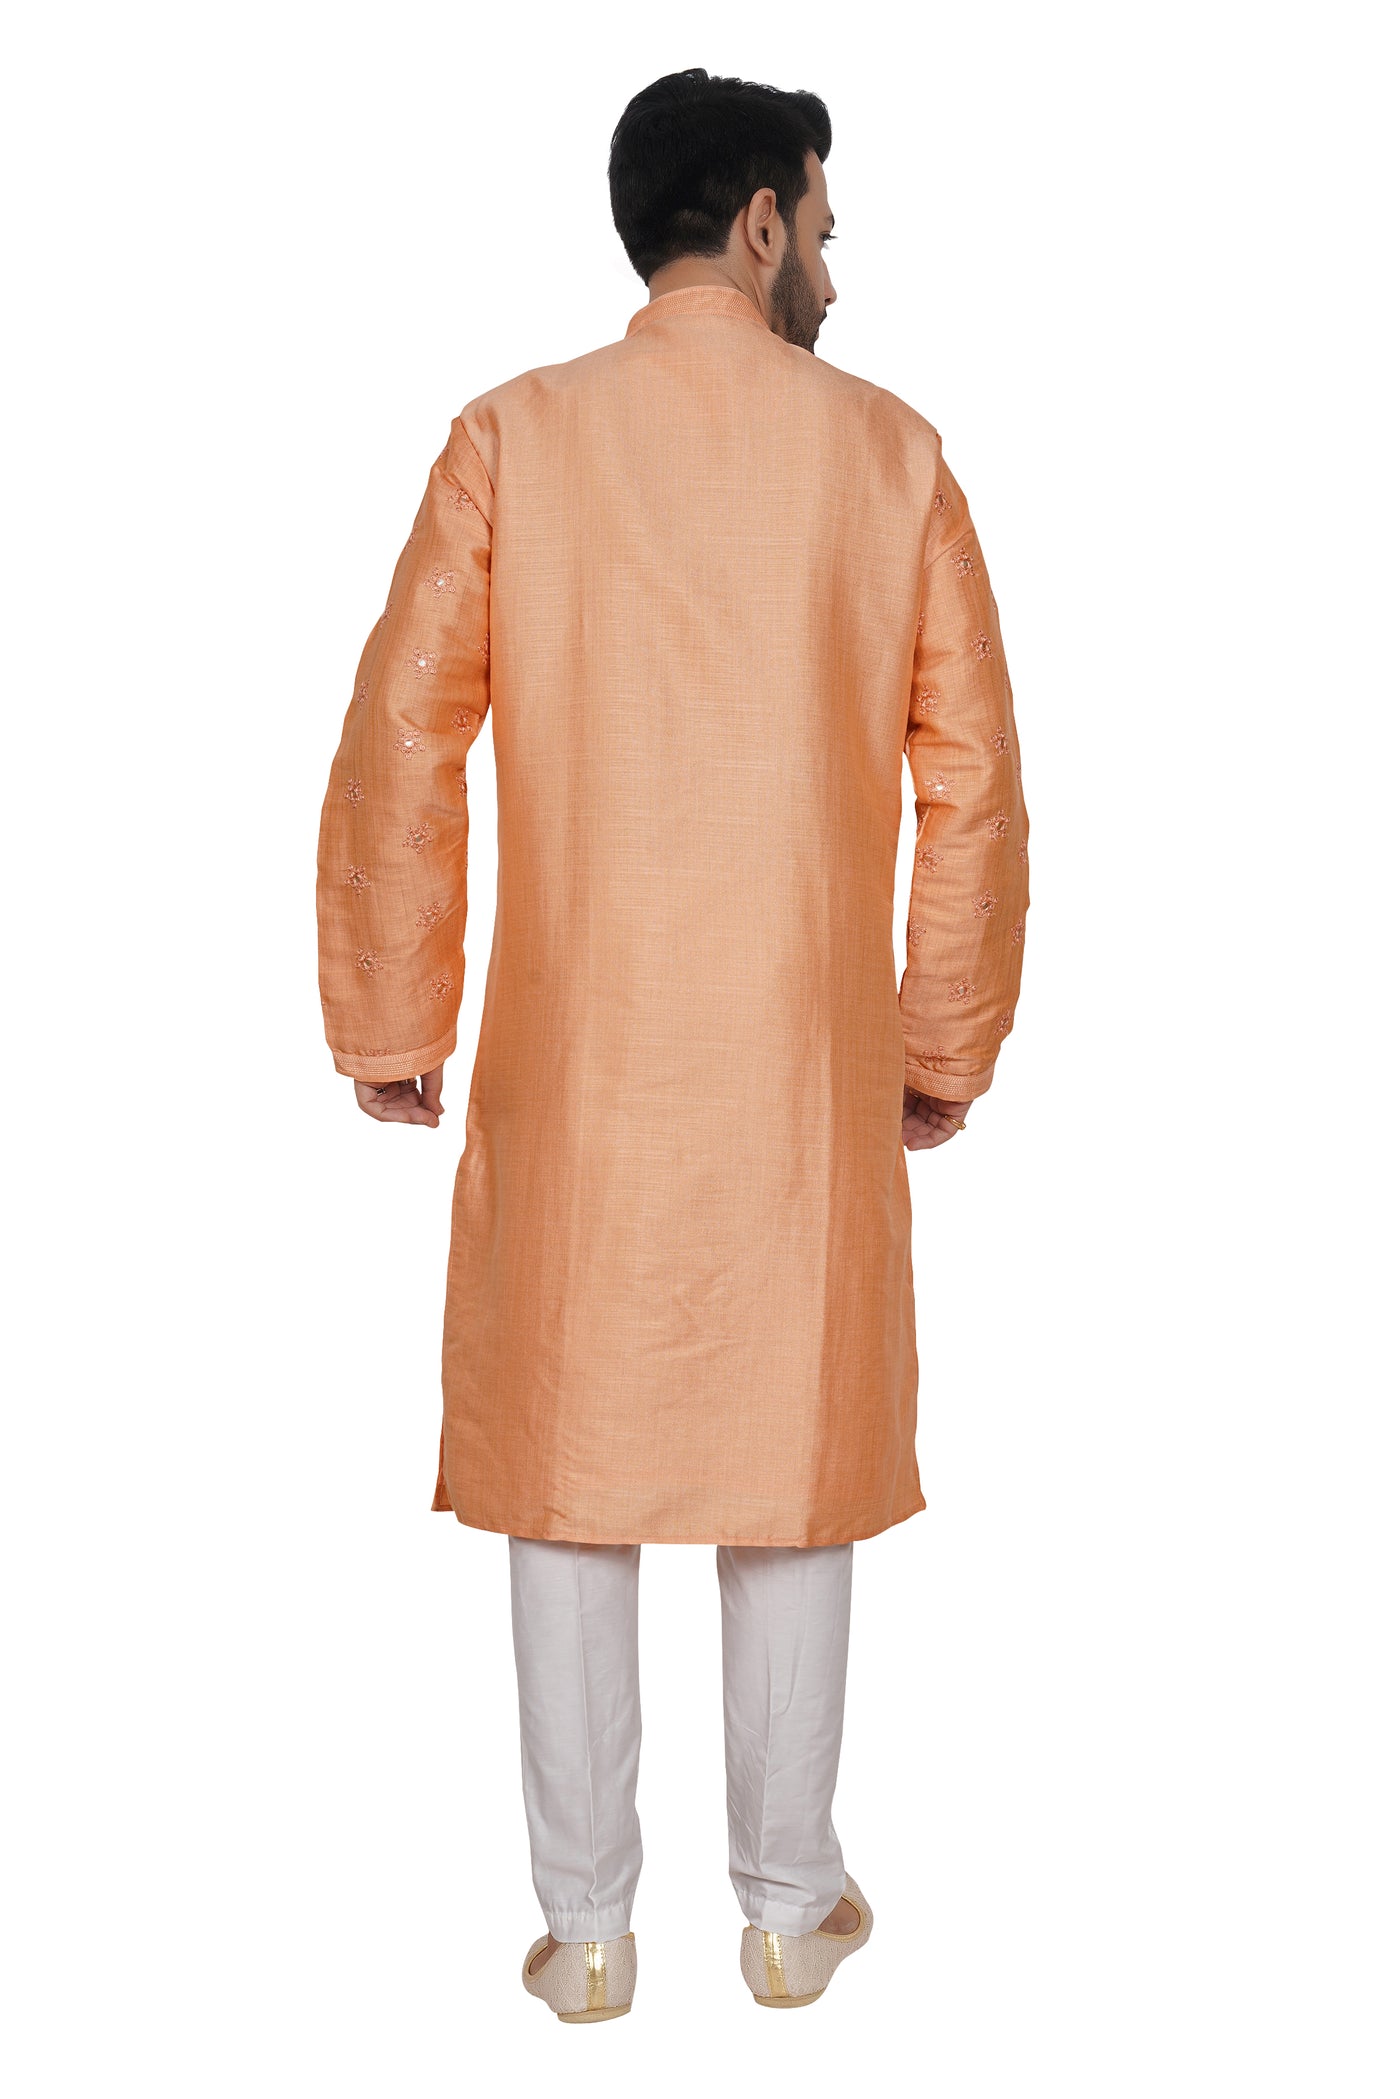 PEACH COLORED KURTA PYJAMA SET WITH EMBROIDERED FLORAL BUTTIS